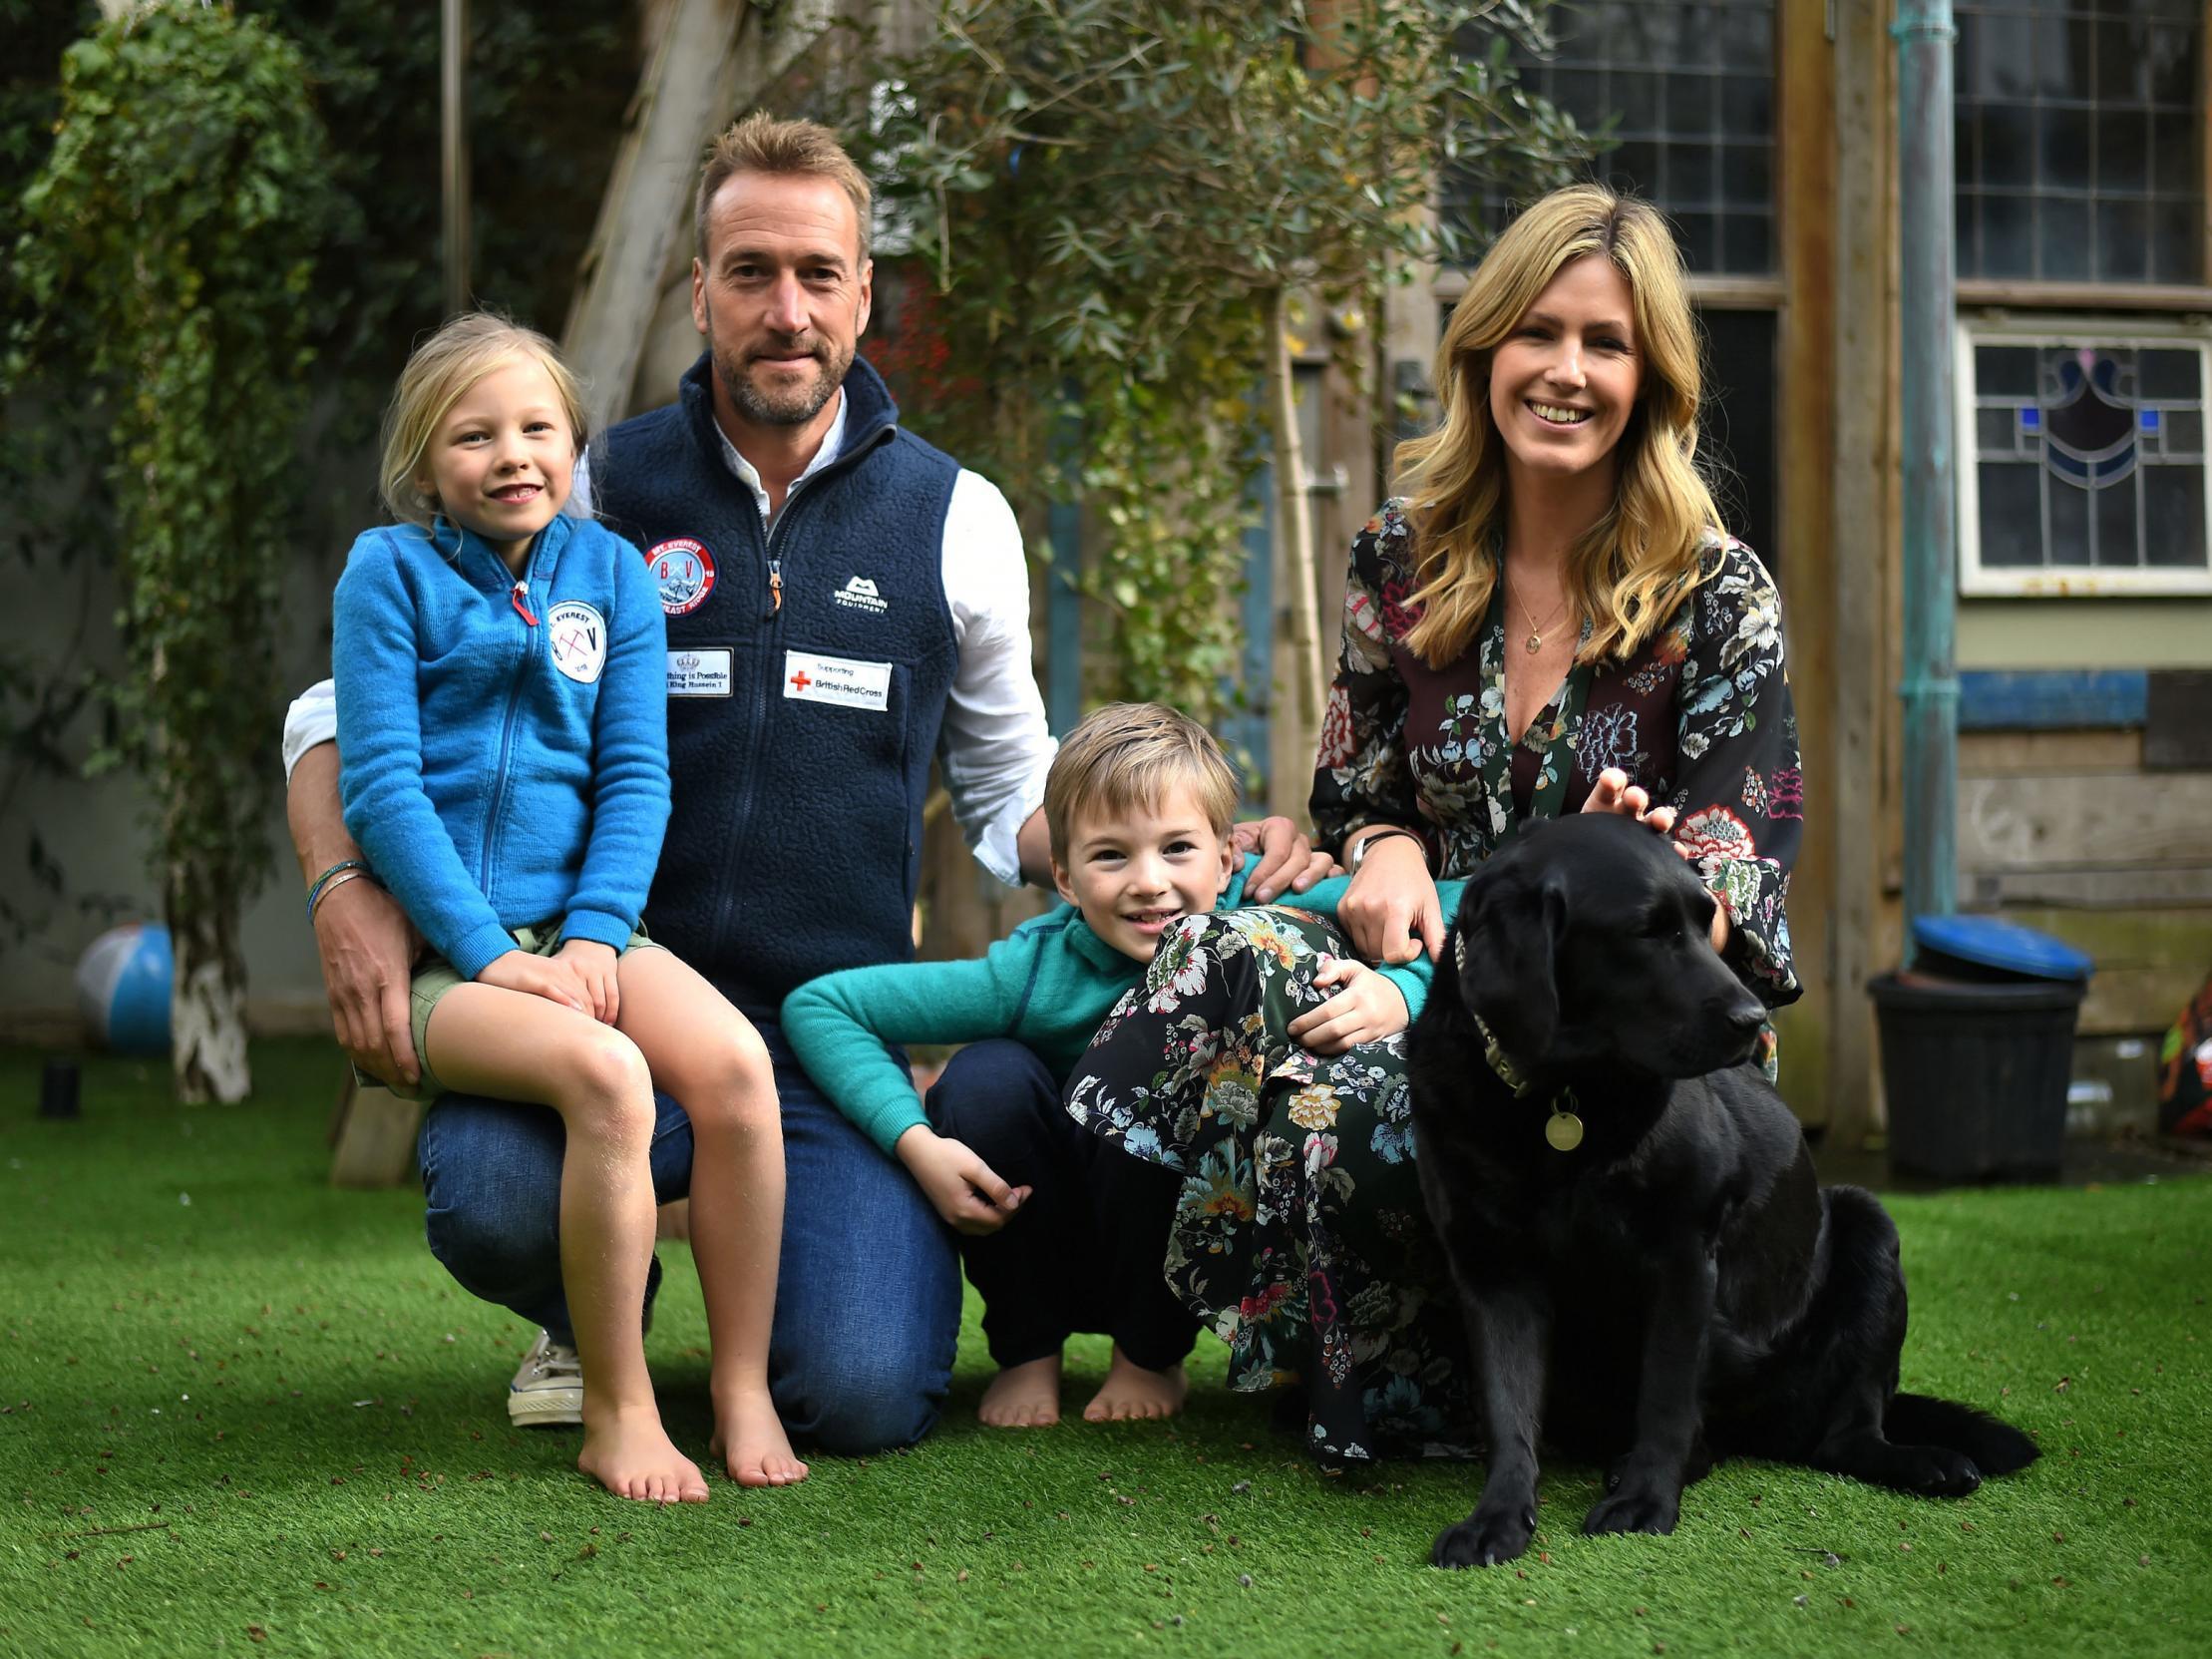 Ben Fogle and his wife Marina with their son Luda and daughter Iona and family dog Storm at their home in west London.